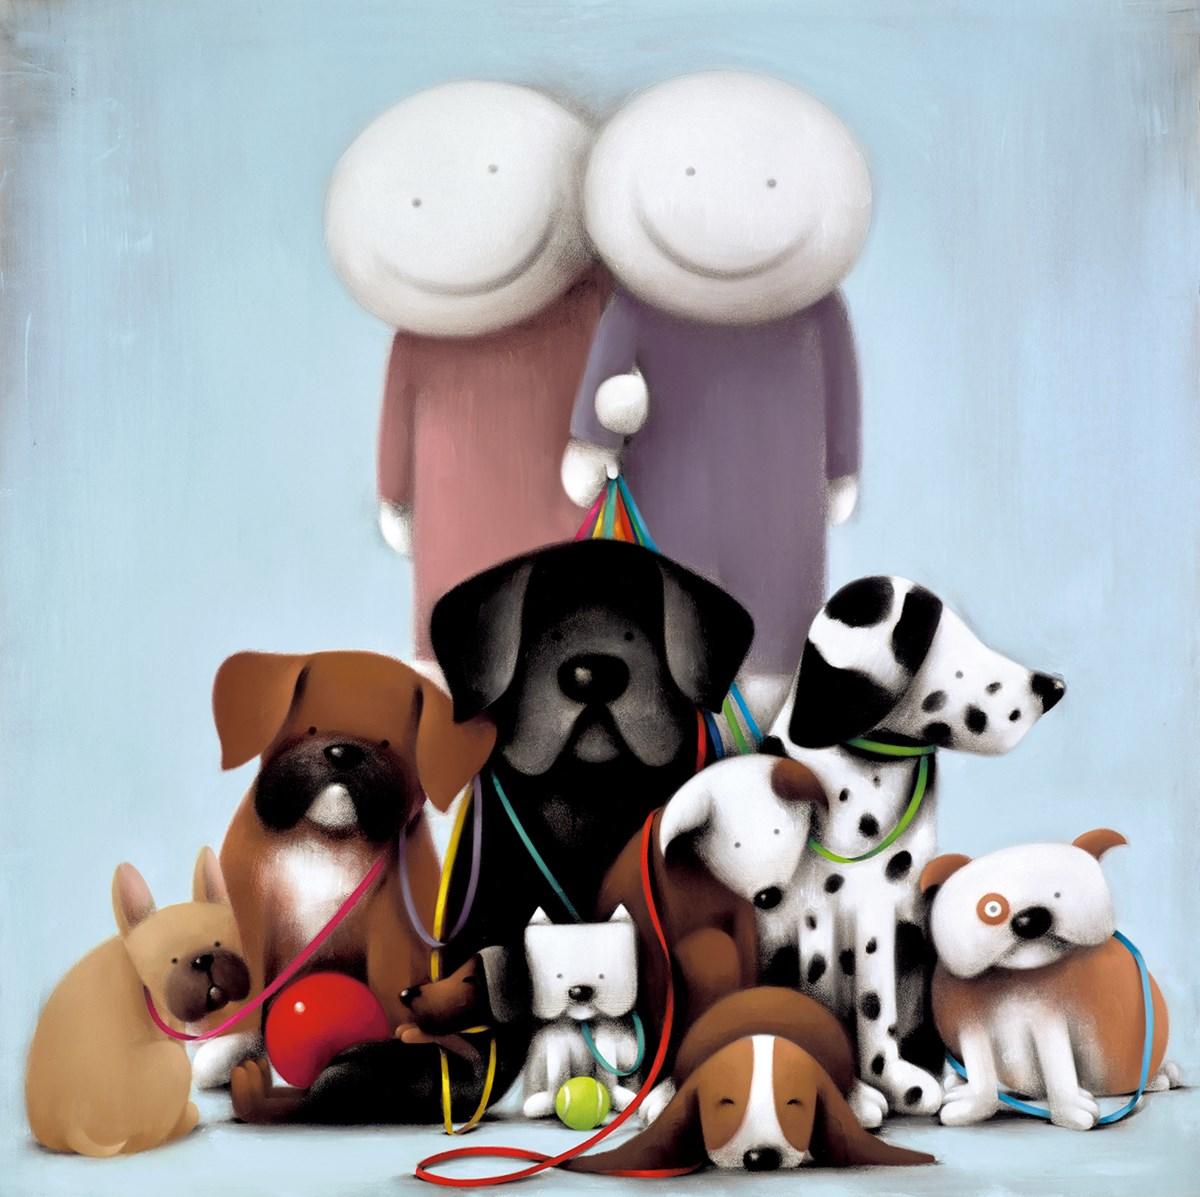 Love Comes in all Shapes and Sizes by Doug Hyde - art print ZHYD730